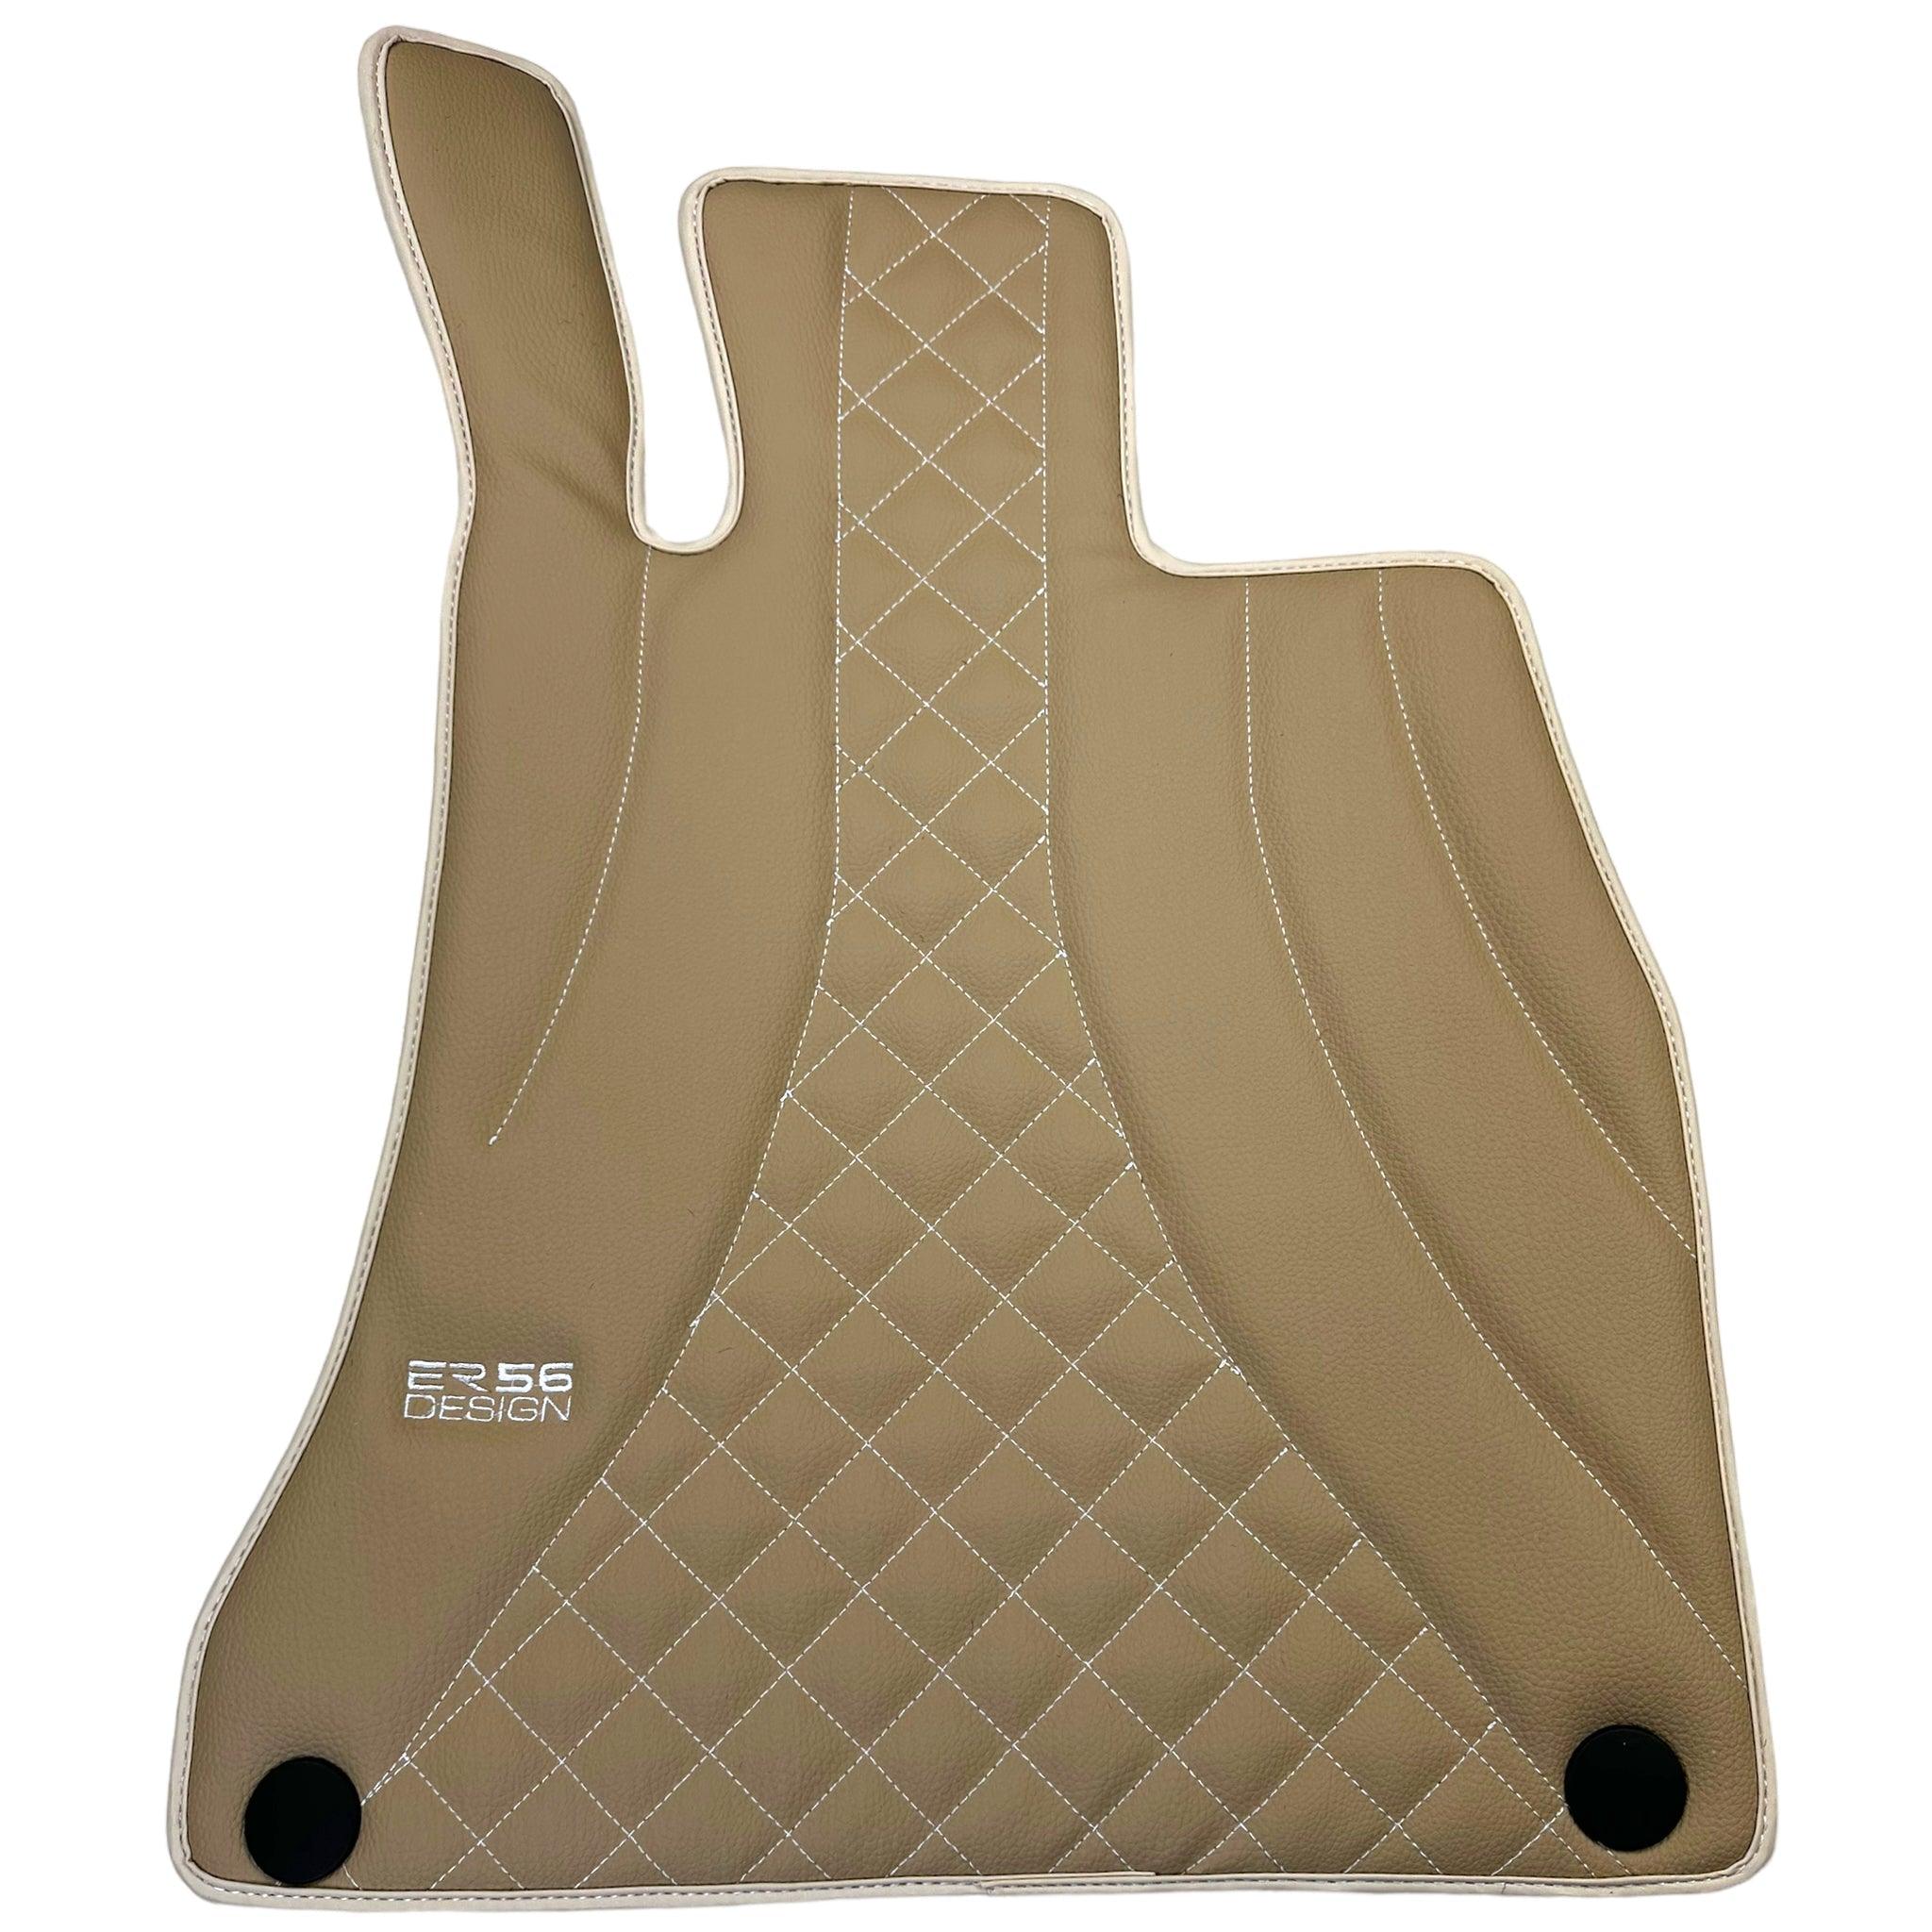 Beige Leather Floor Mats For Mercedes Benz C-Class CL203 Coupe (2000-2008)